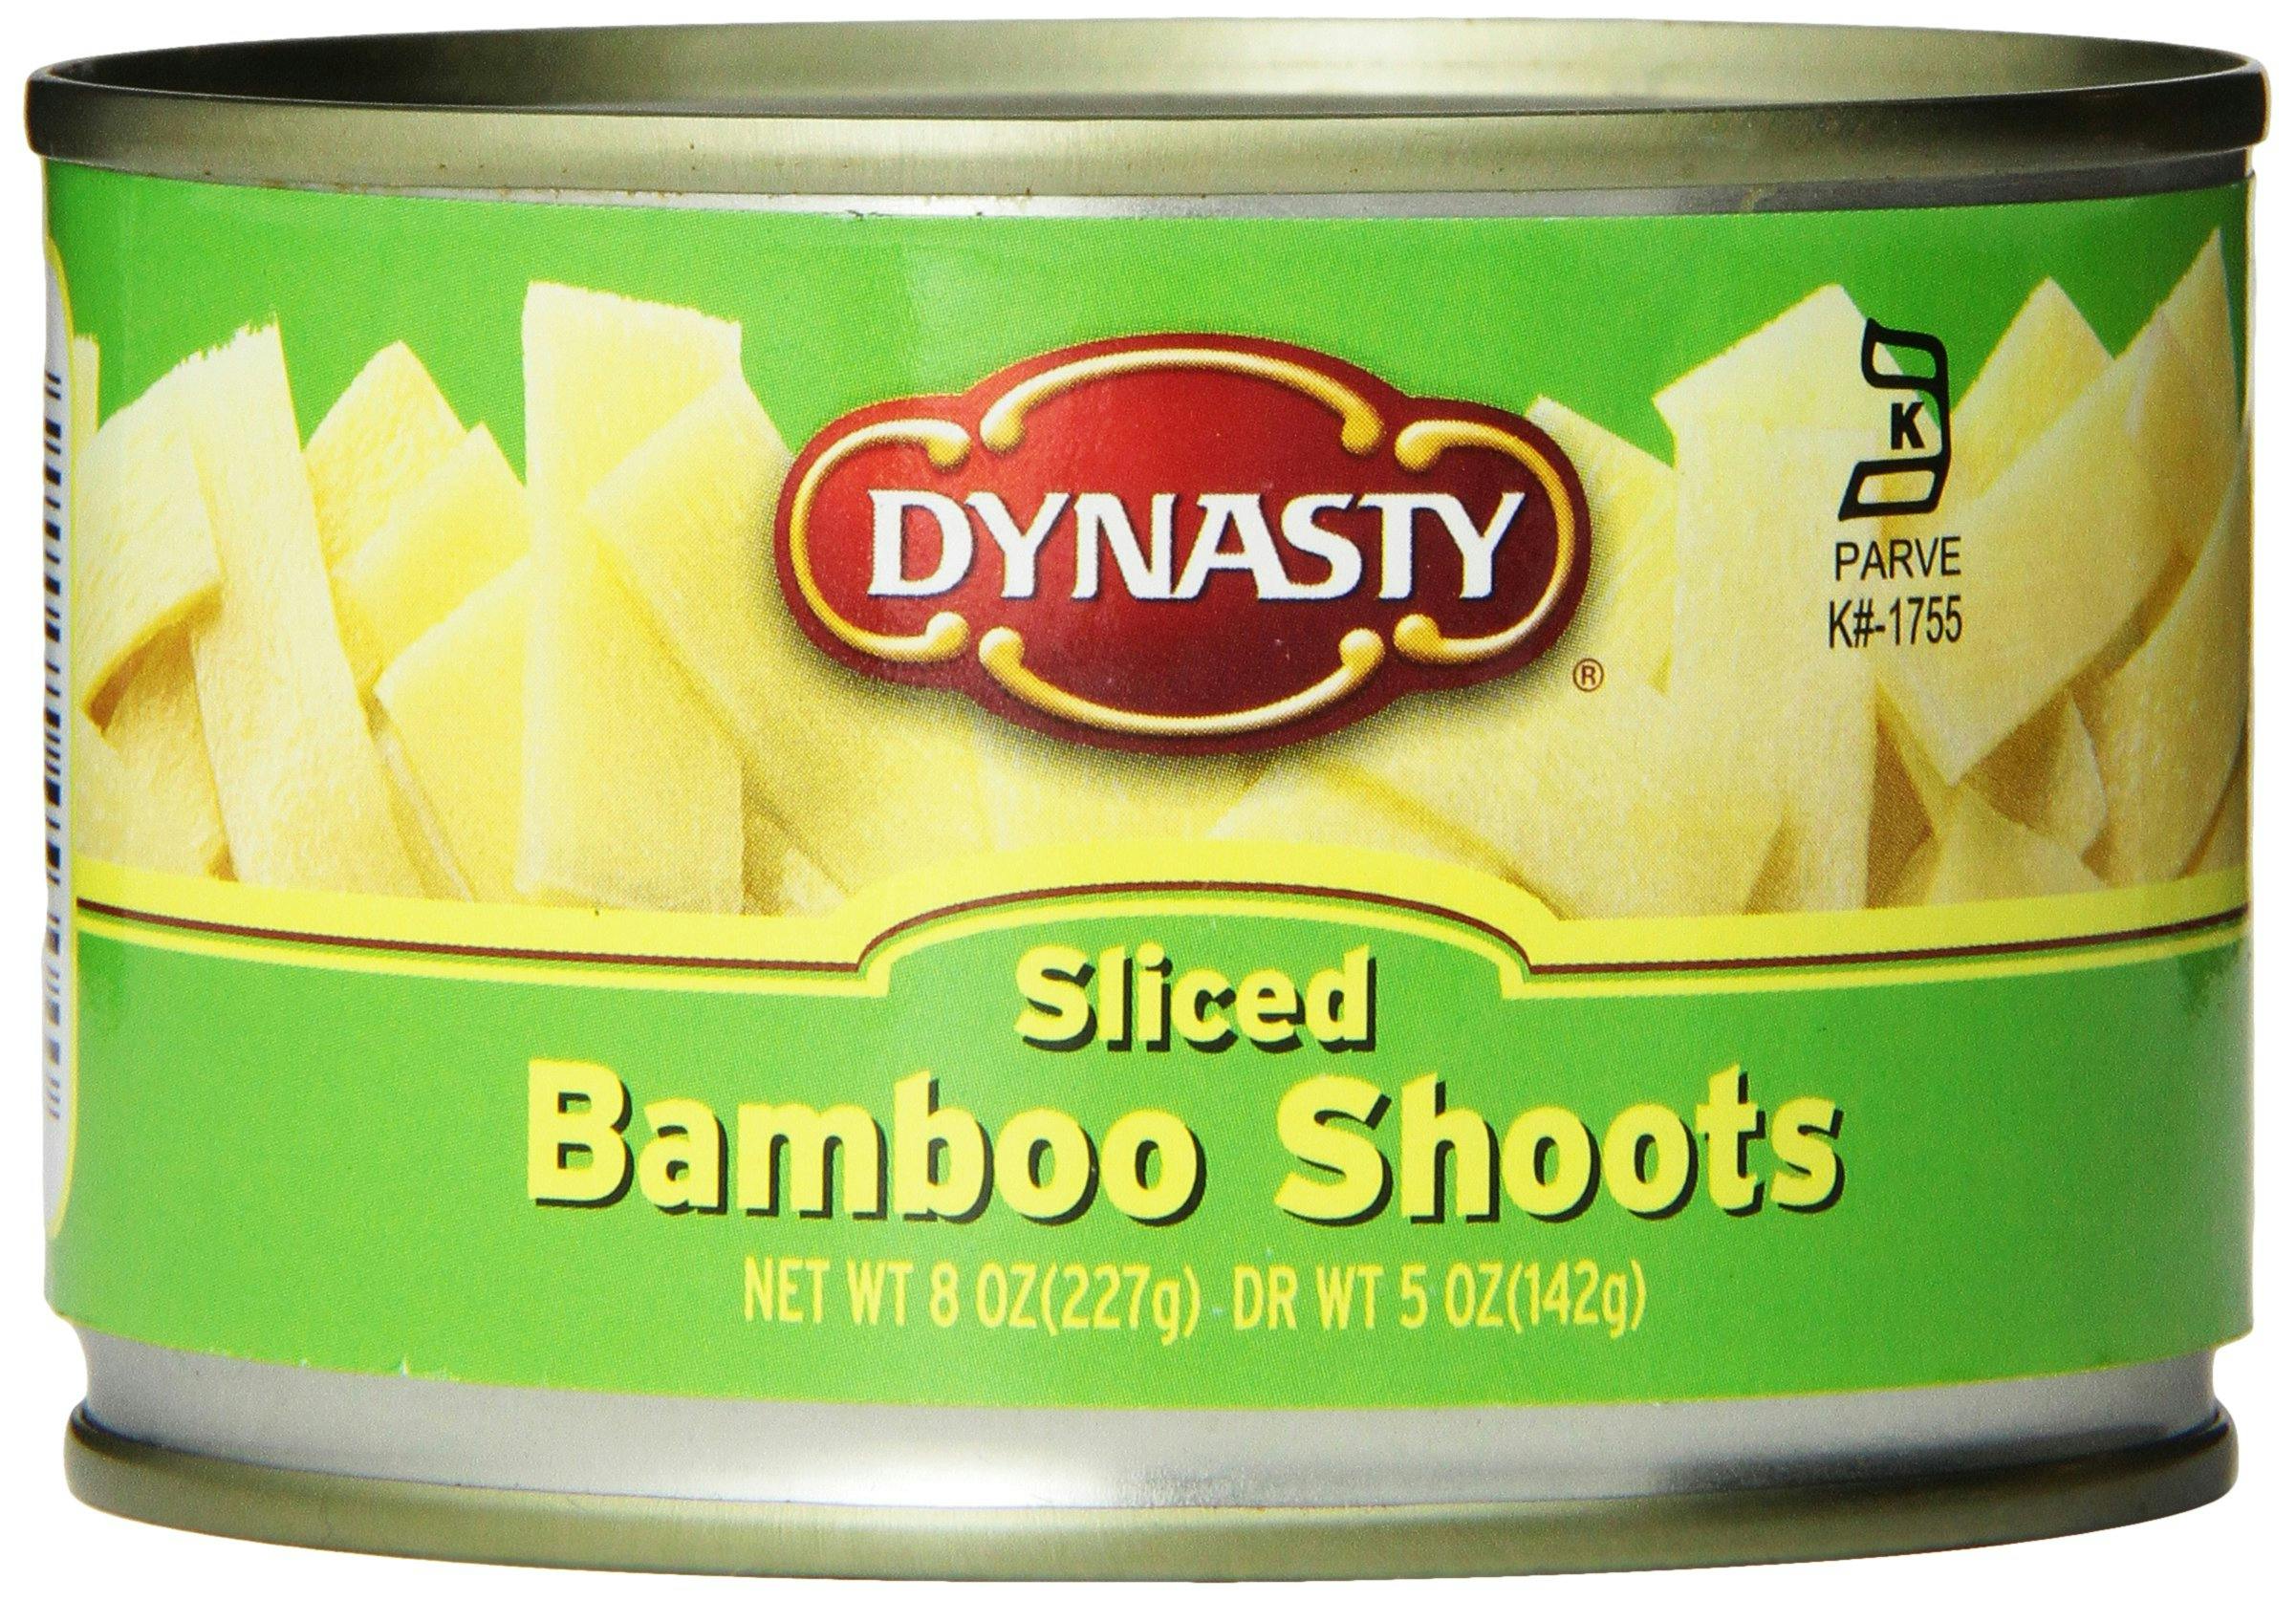 of bamboo shoots